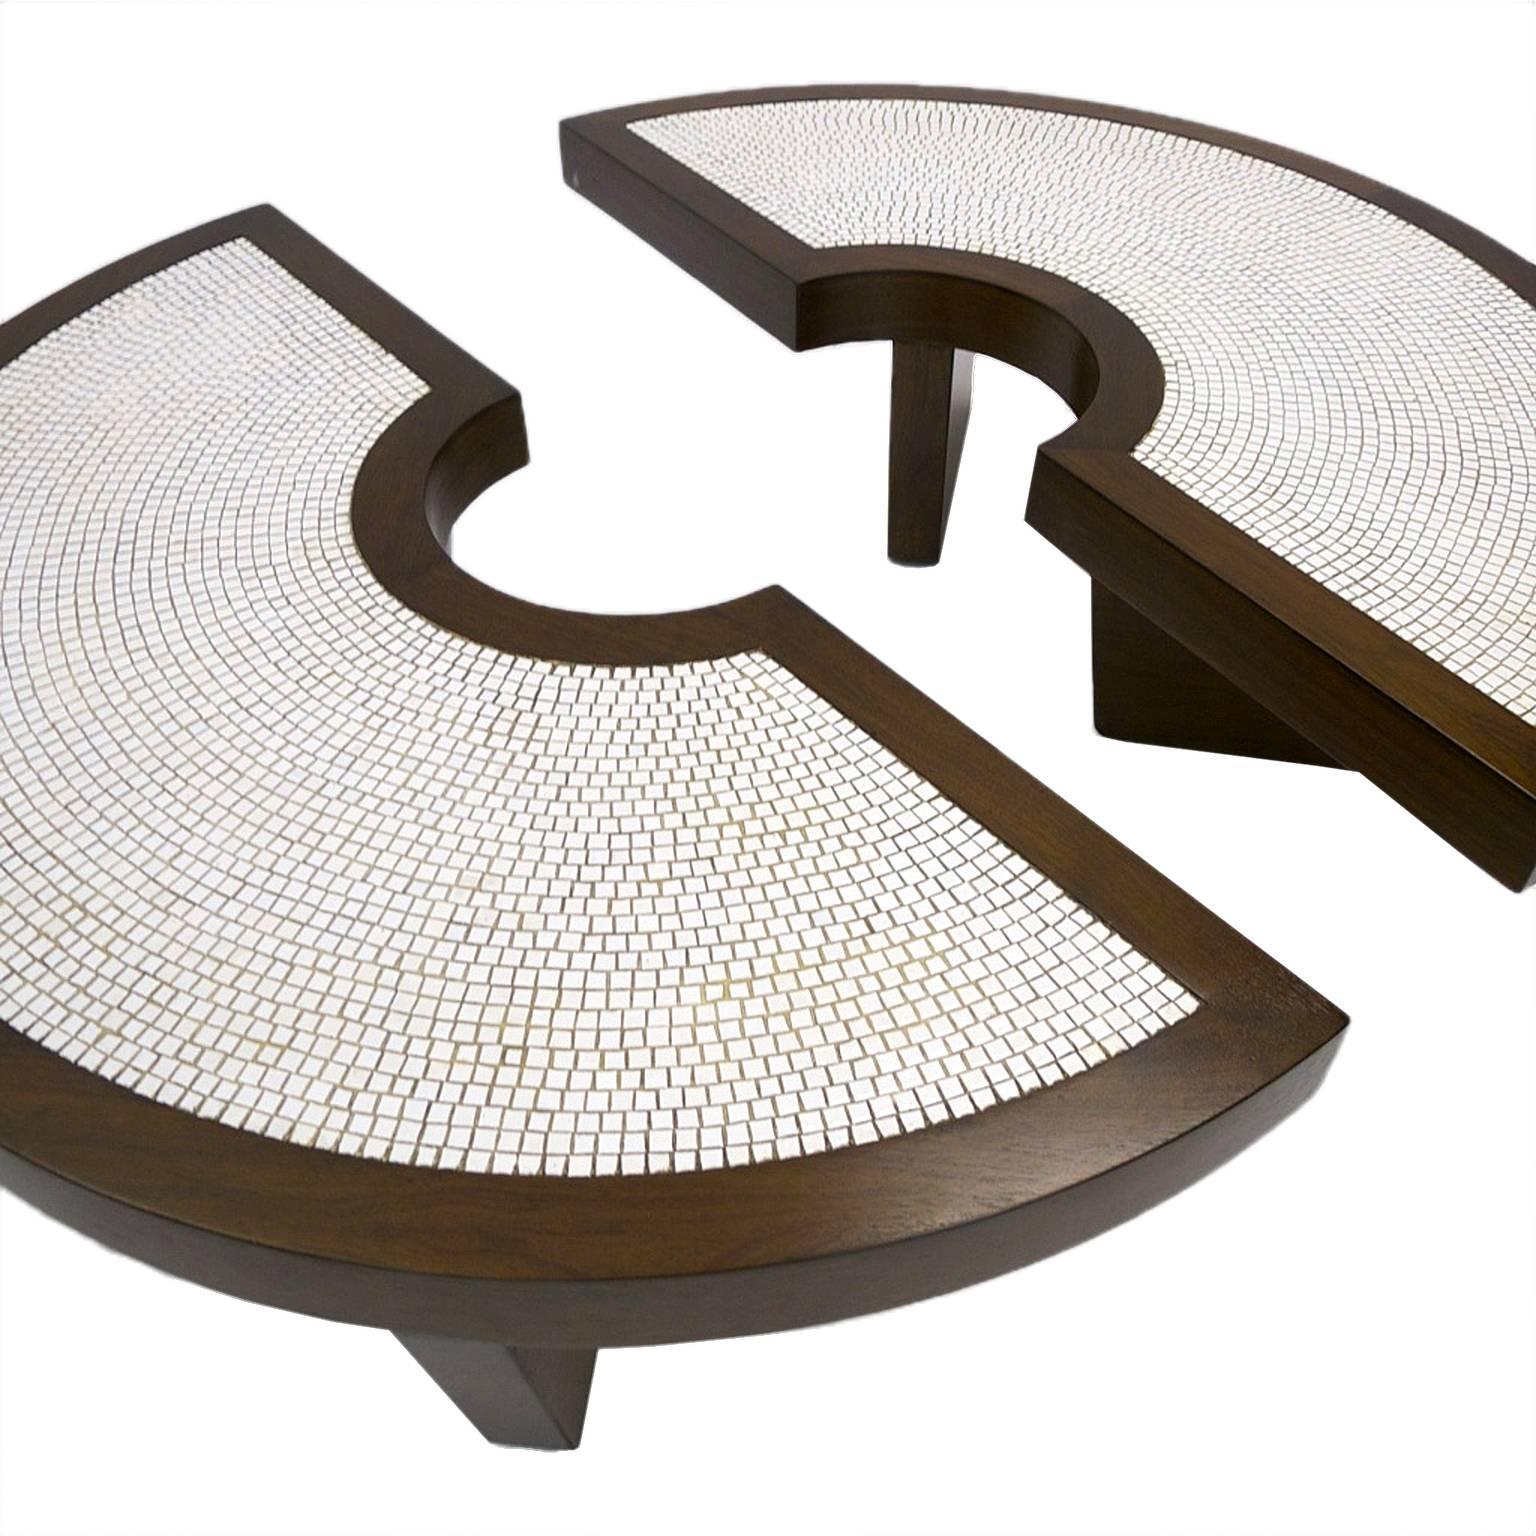 Mid-Century Modern Rare Mosaic S-Top or Round Harvey Probber Two-Piece Nucleus Cocktail Table